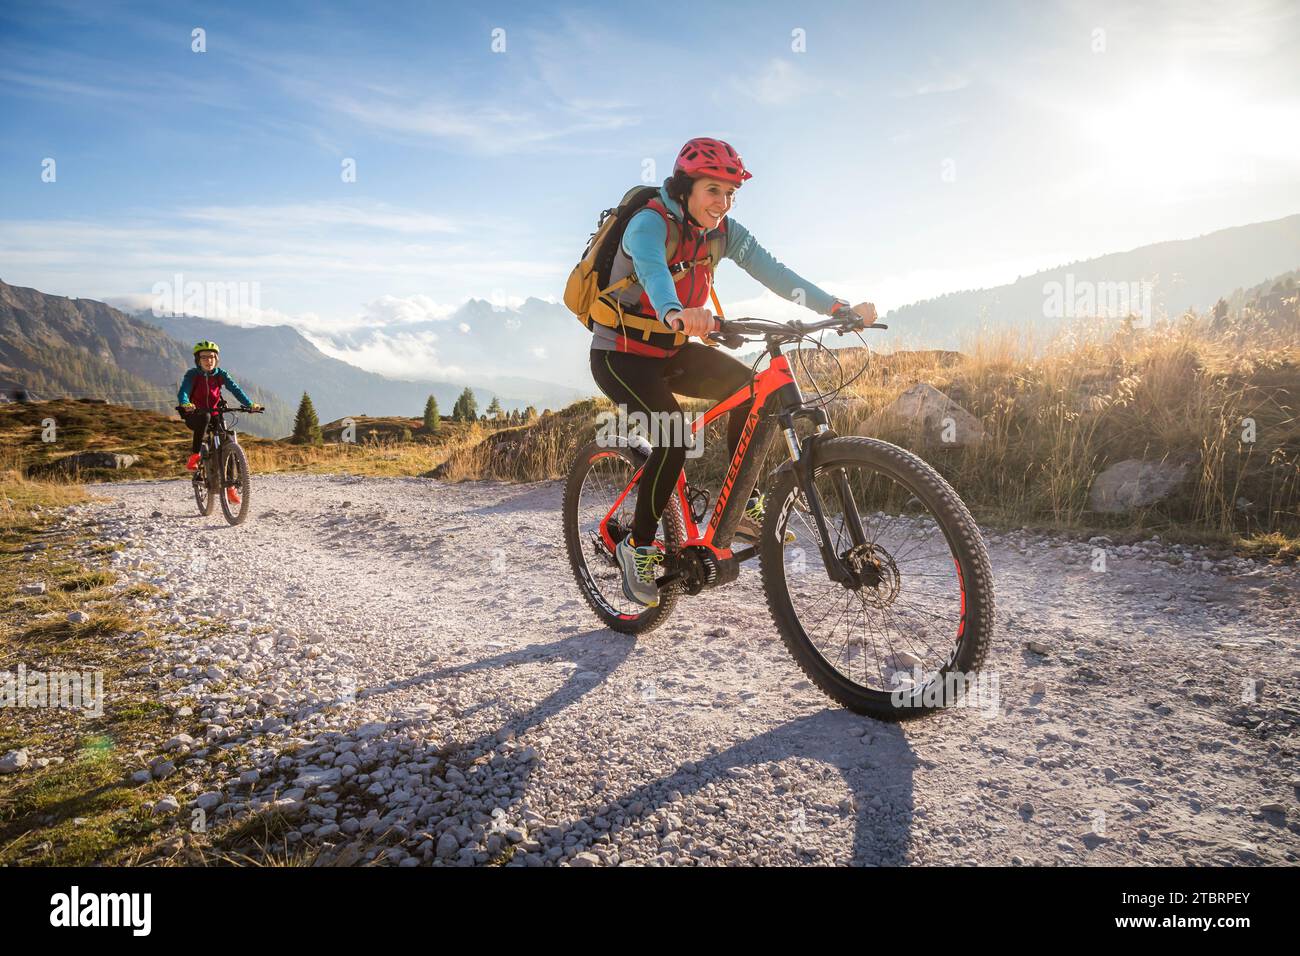 Italy, Veneto, province of Belluno, outdoor family activities, mother and teenage daughter along a dirt road riding their respective e-bikes Stock Photo